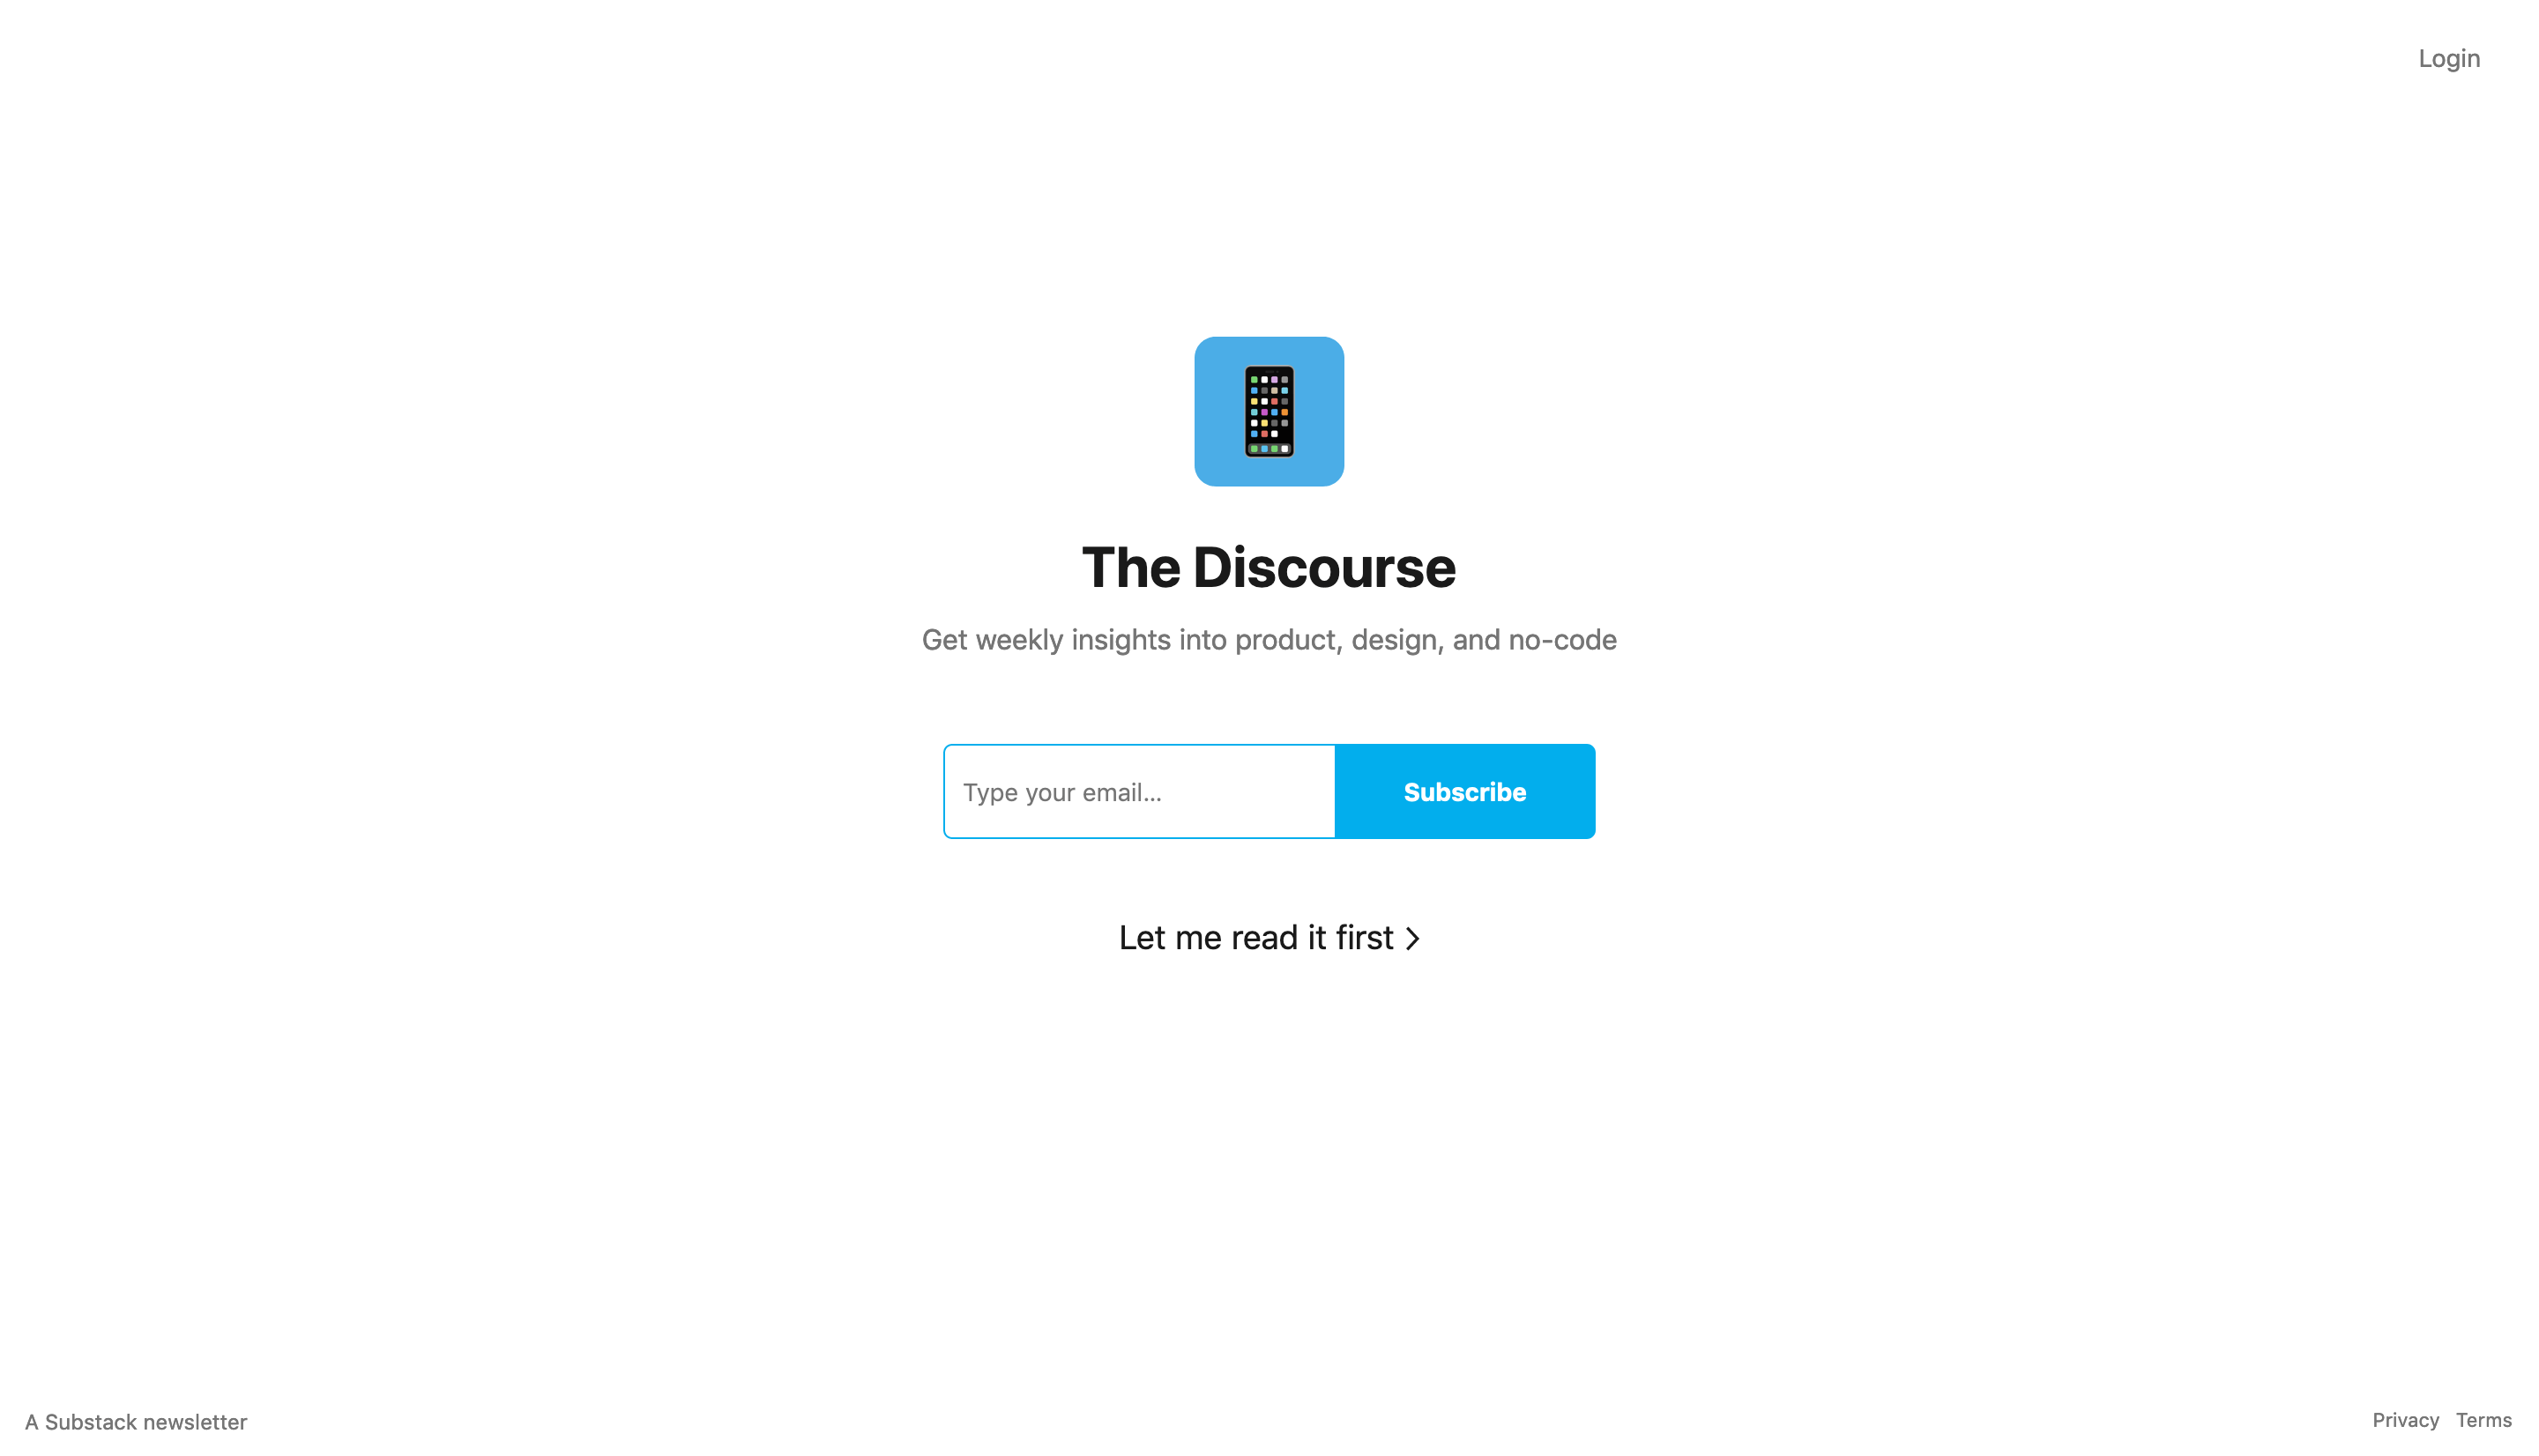 The Discourse homepage